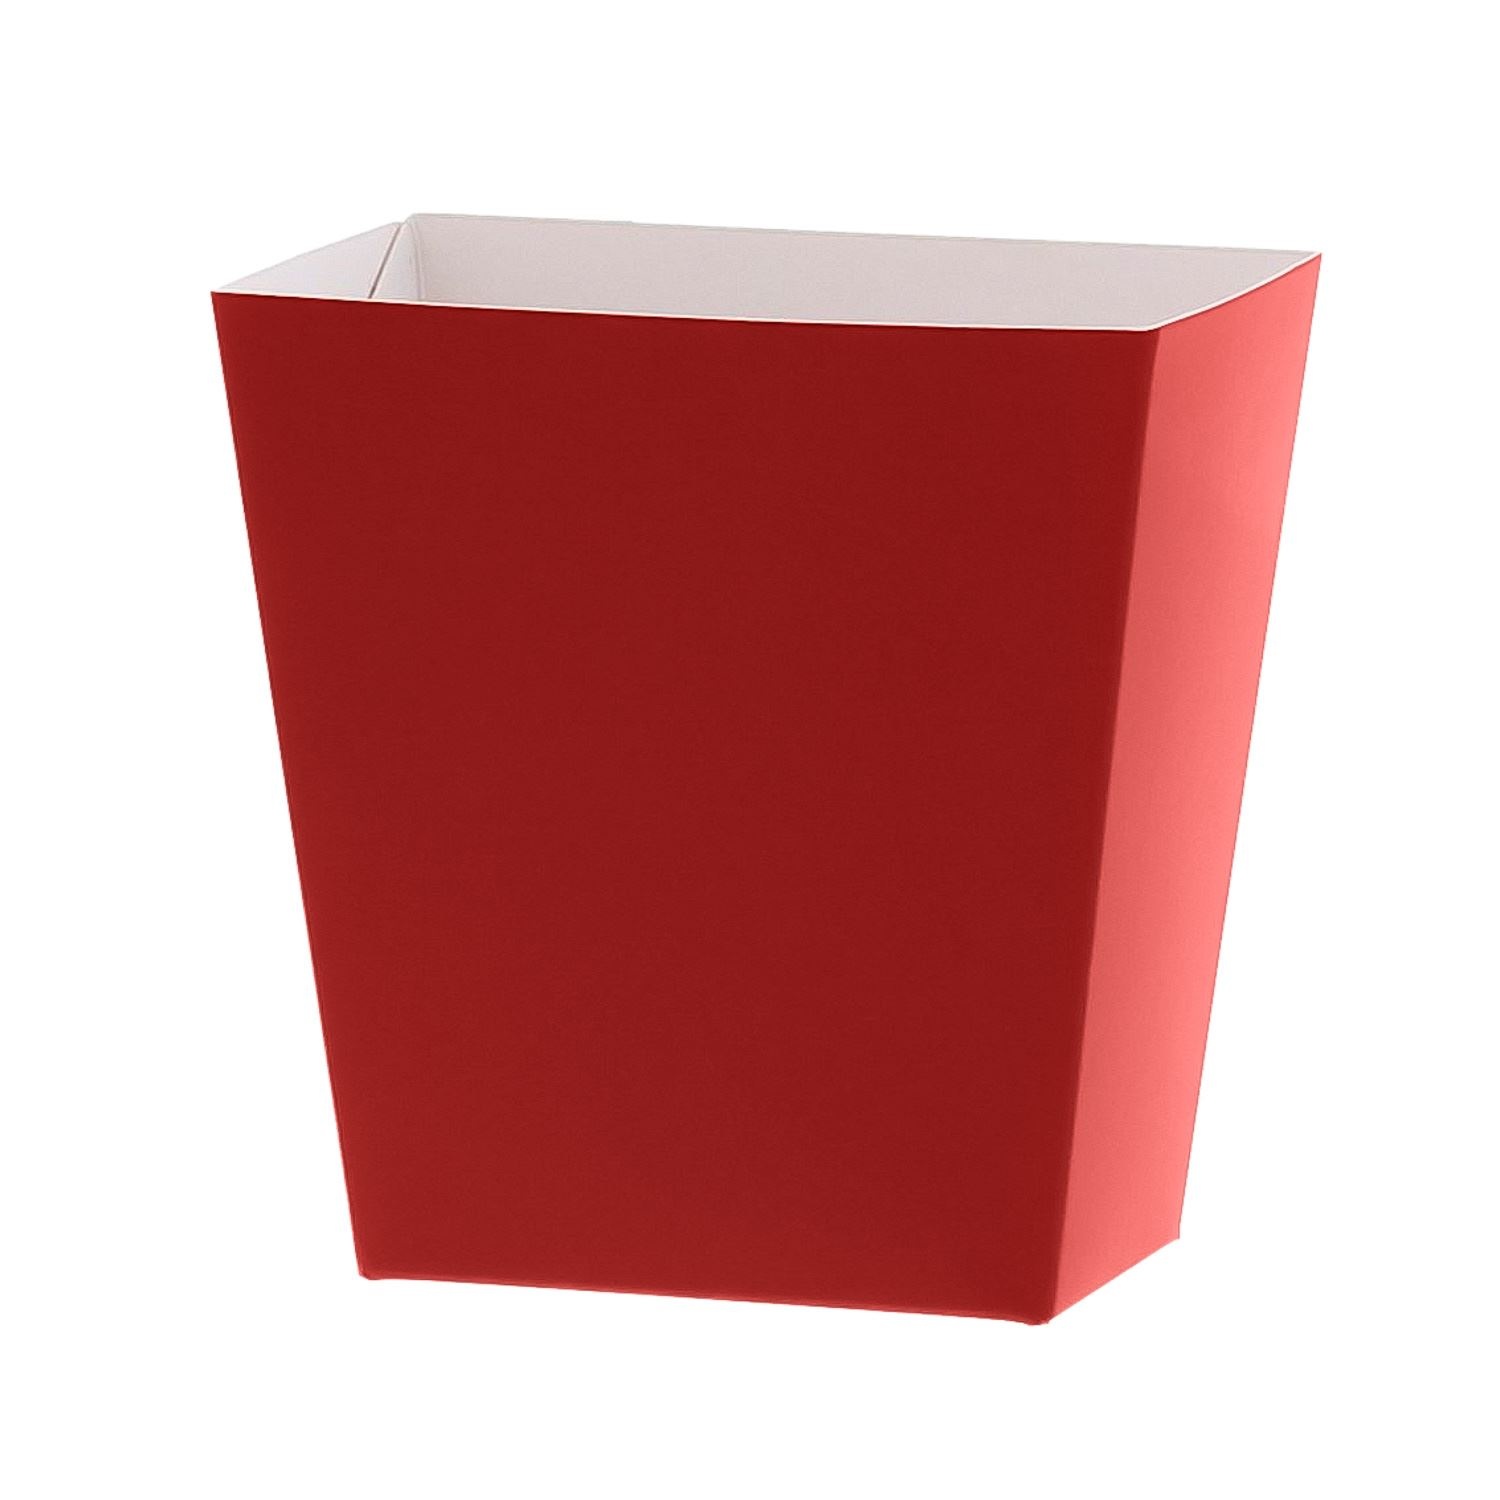 Conical tray high red - 2 sizes  - 50 pieces